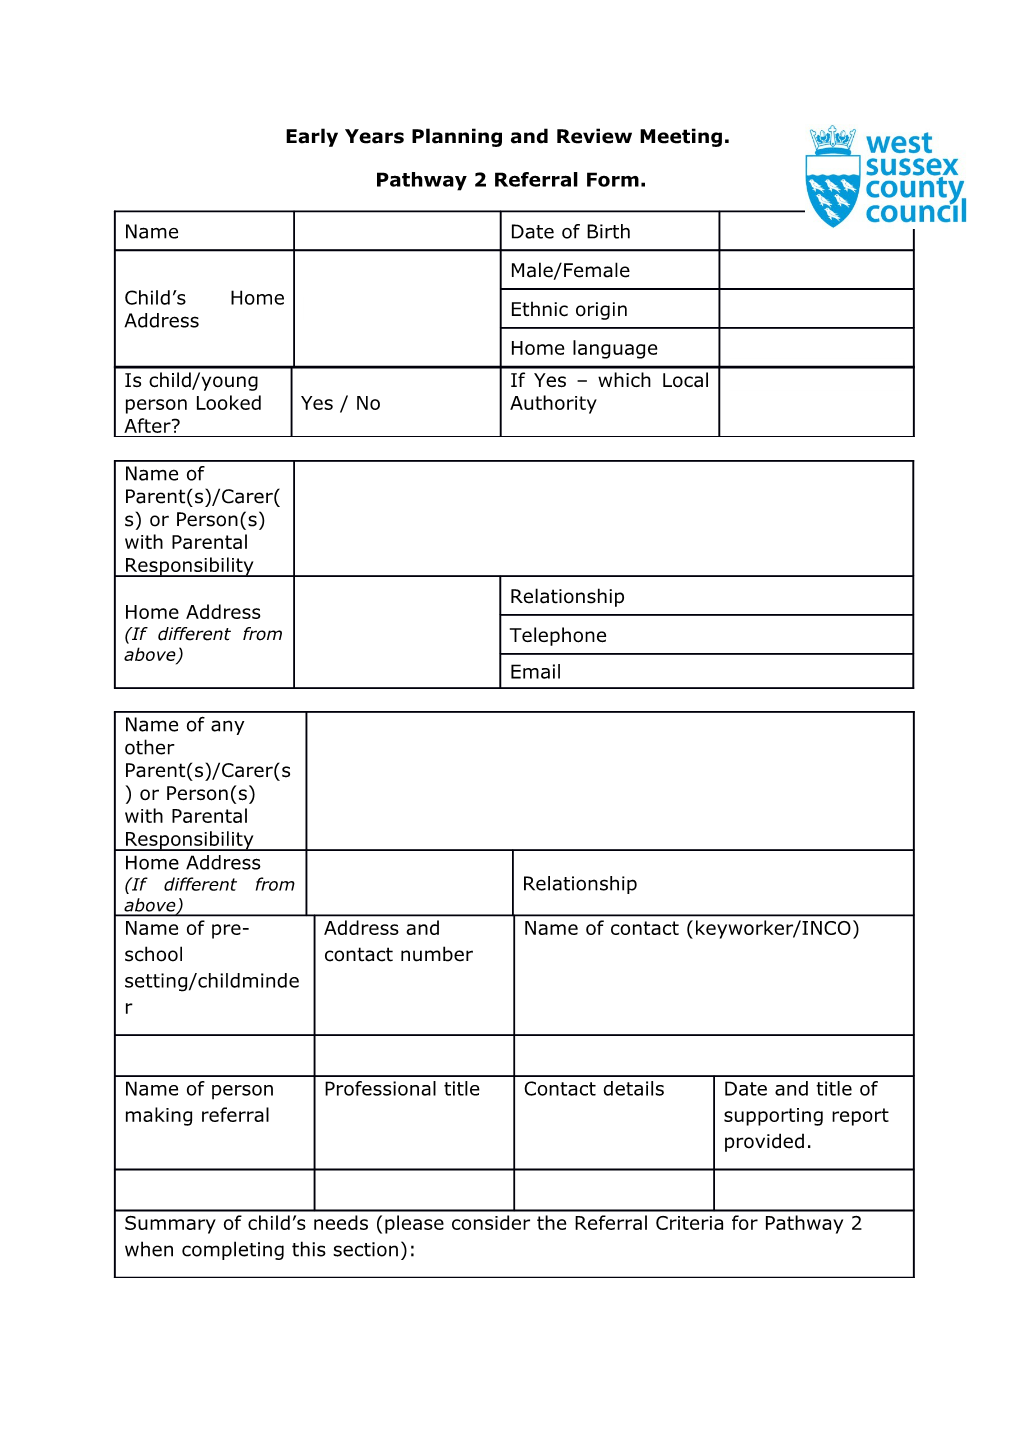 Pathway 2 Referral Form